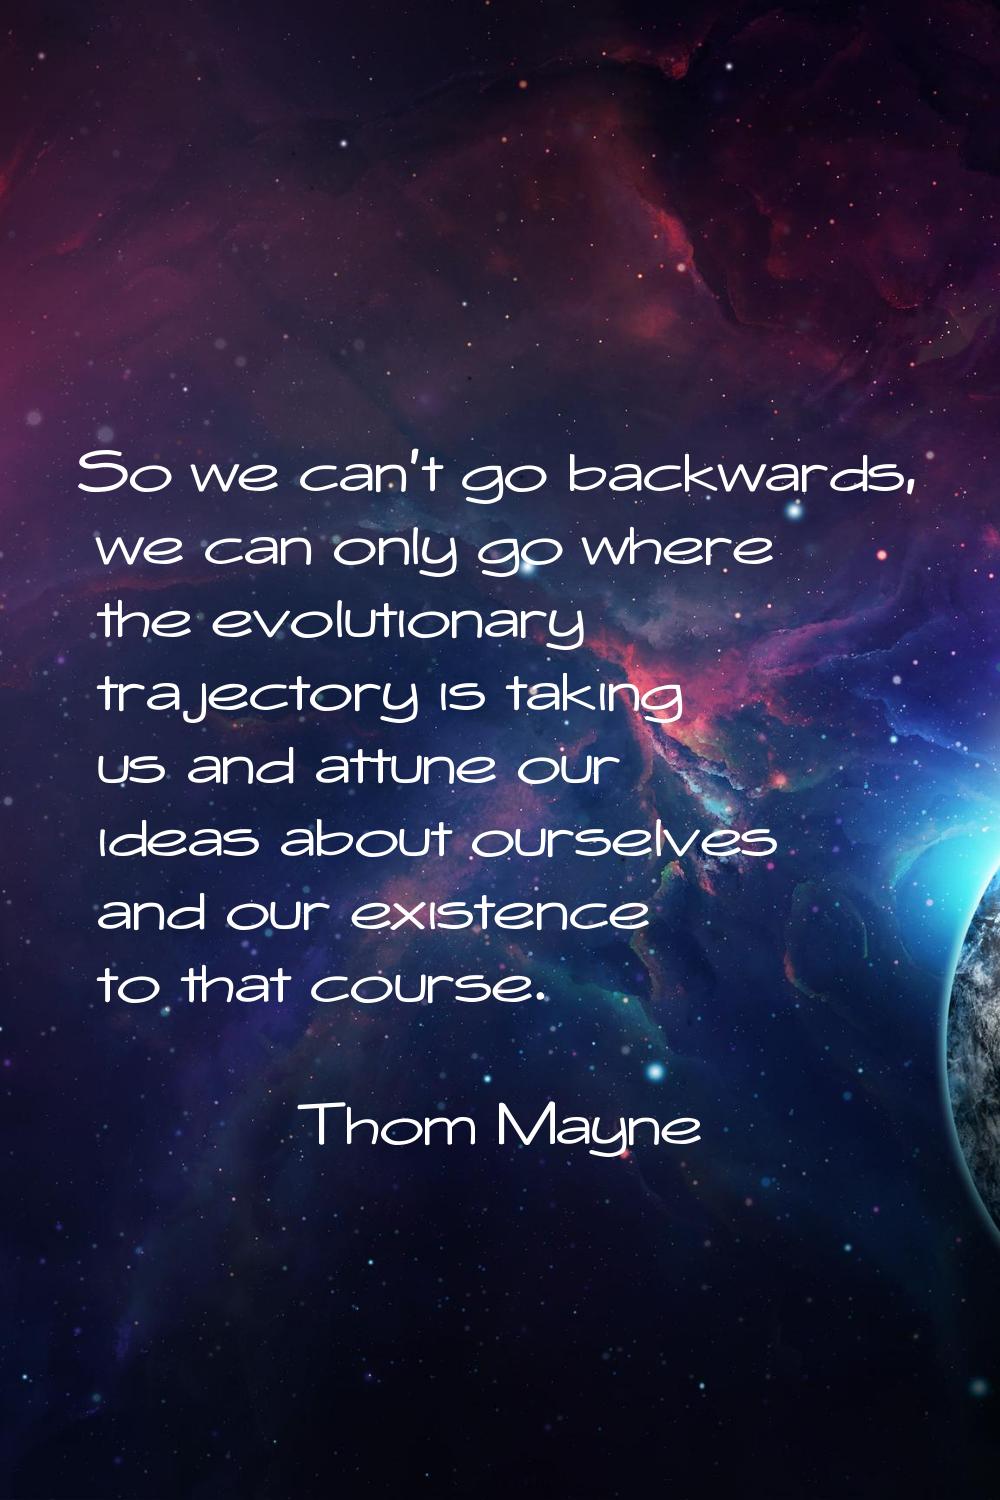 So we can't go backwards, we can only go where the evolutionary trajectory is taking us and attune 